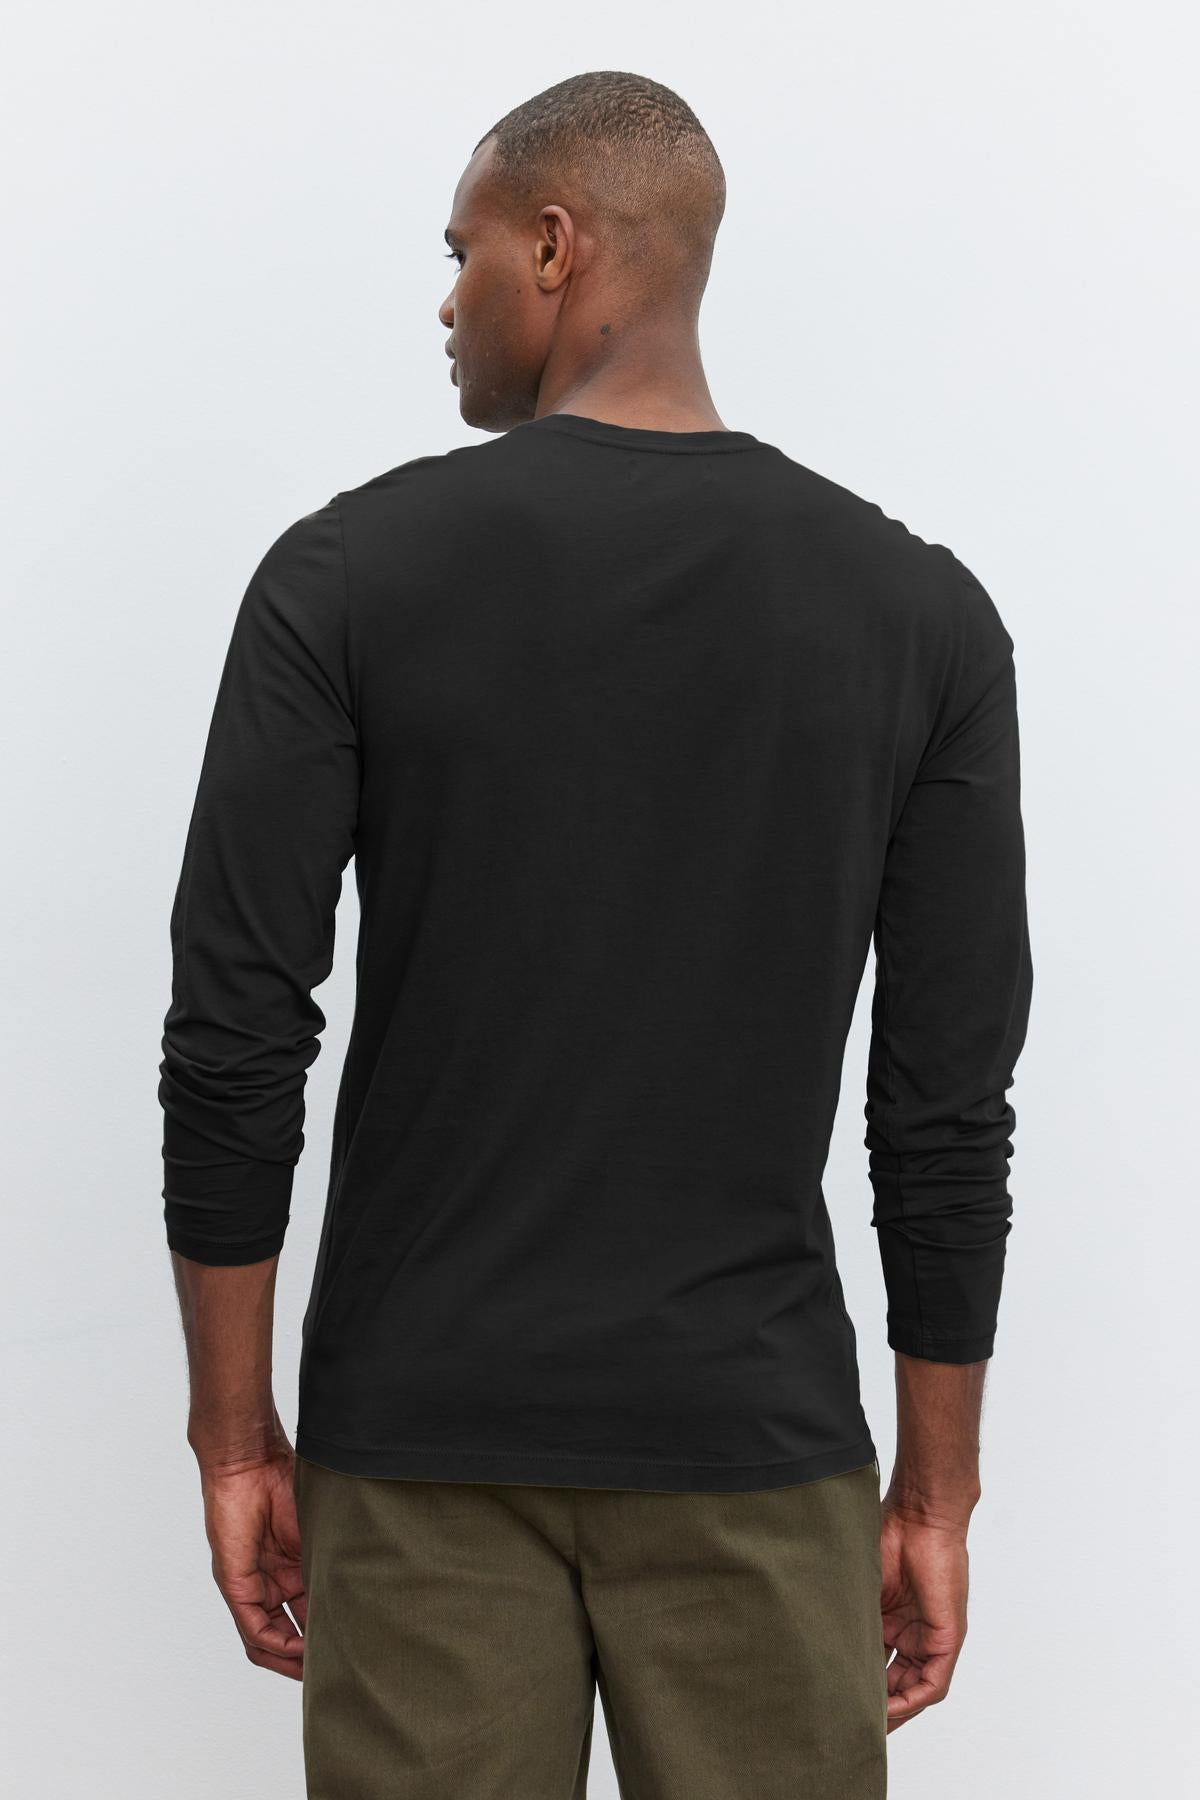 A man viewed from behind wearing a Velvet by Graham & Spencer SKEETER WHISPER CLASSIC CREW NECK TEE and olive green pants, standing against a white background.-36342439280833